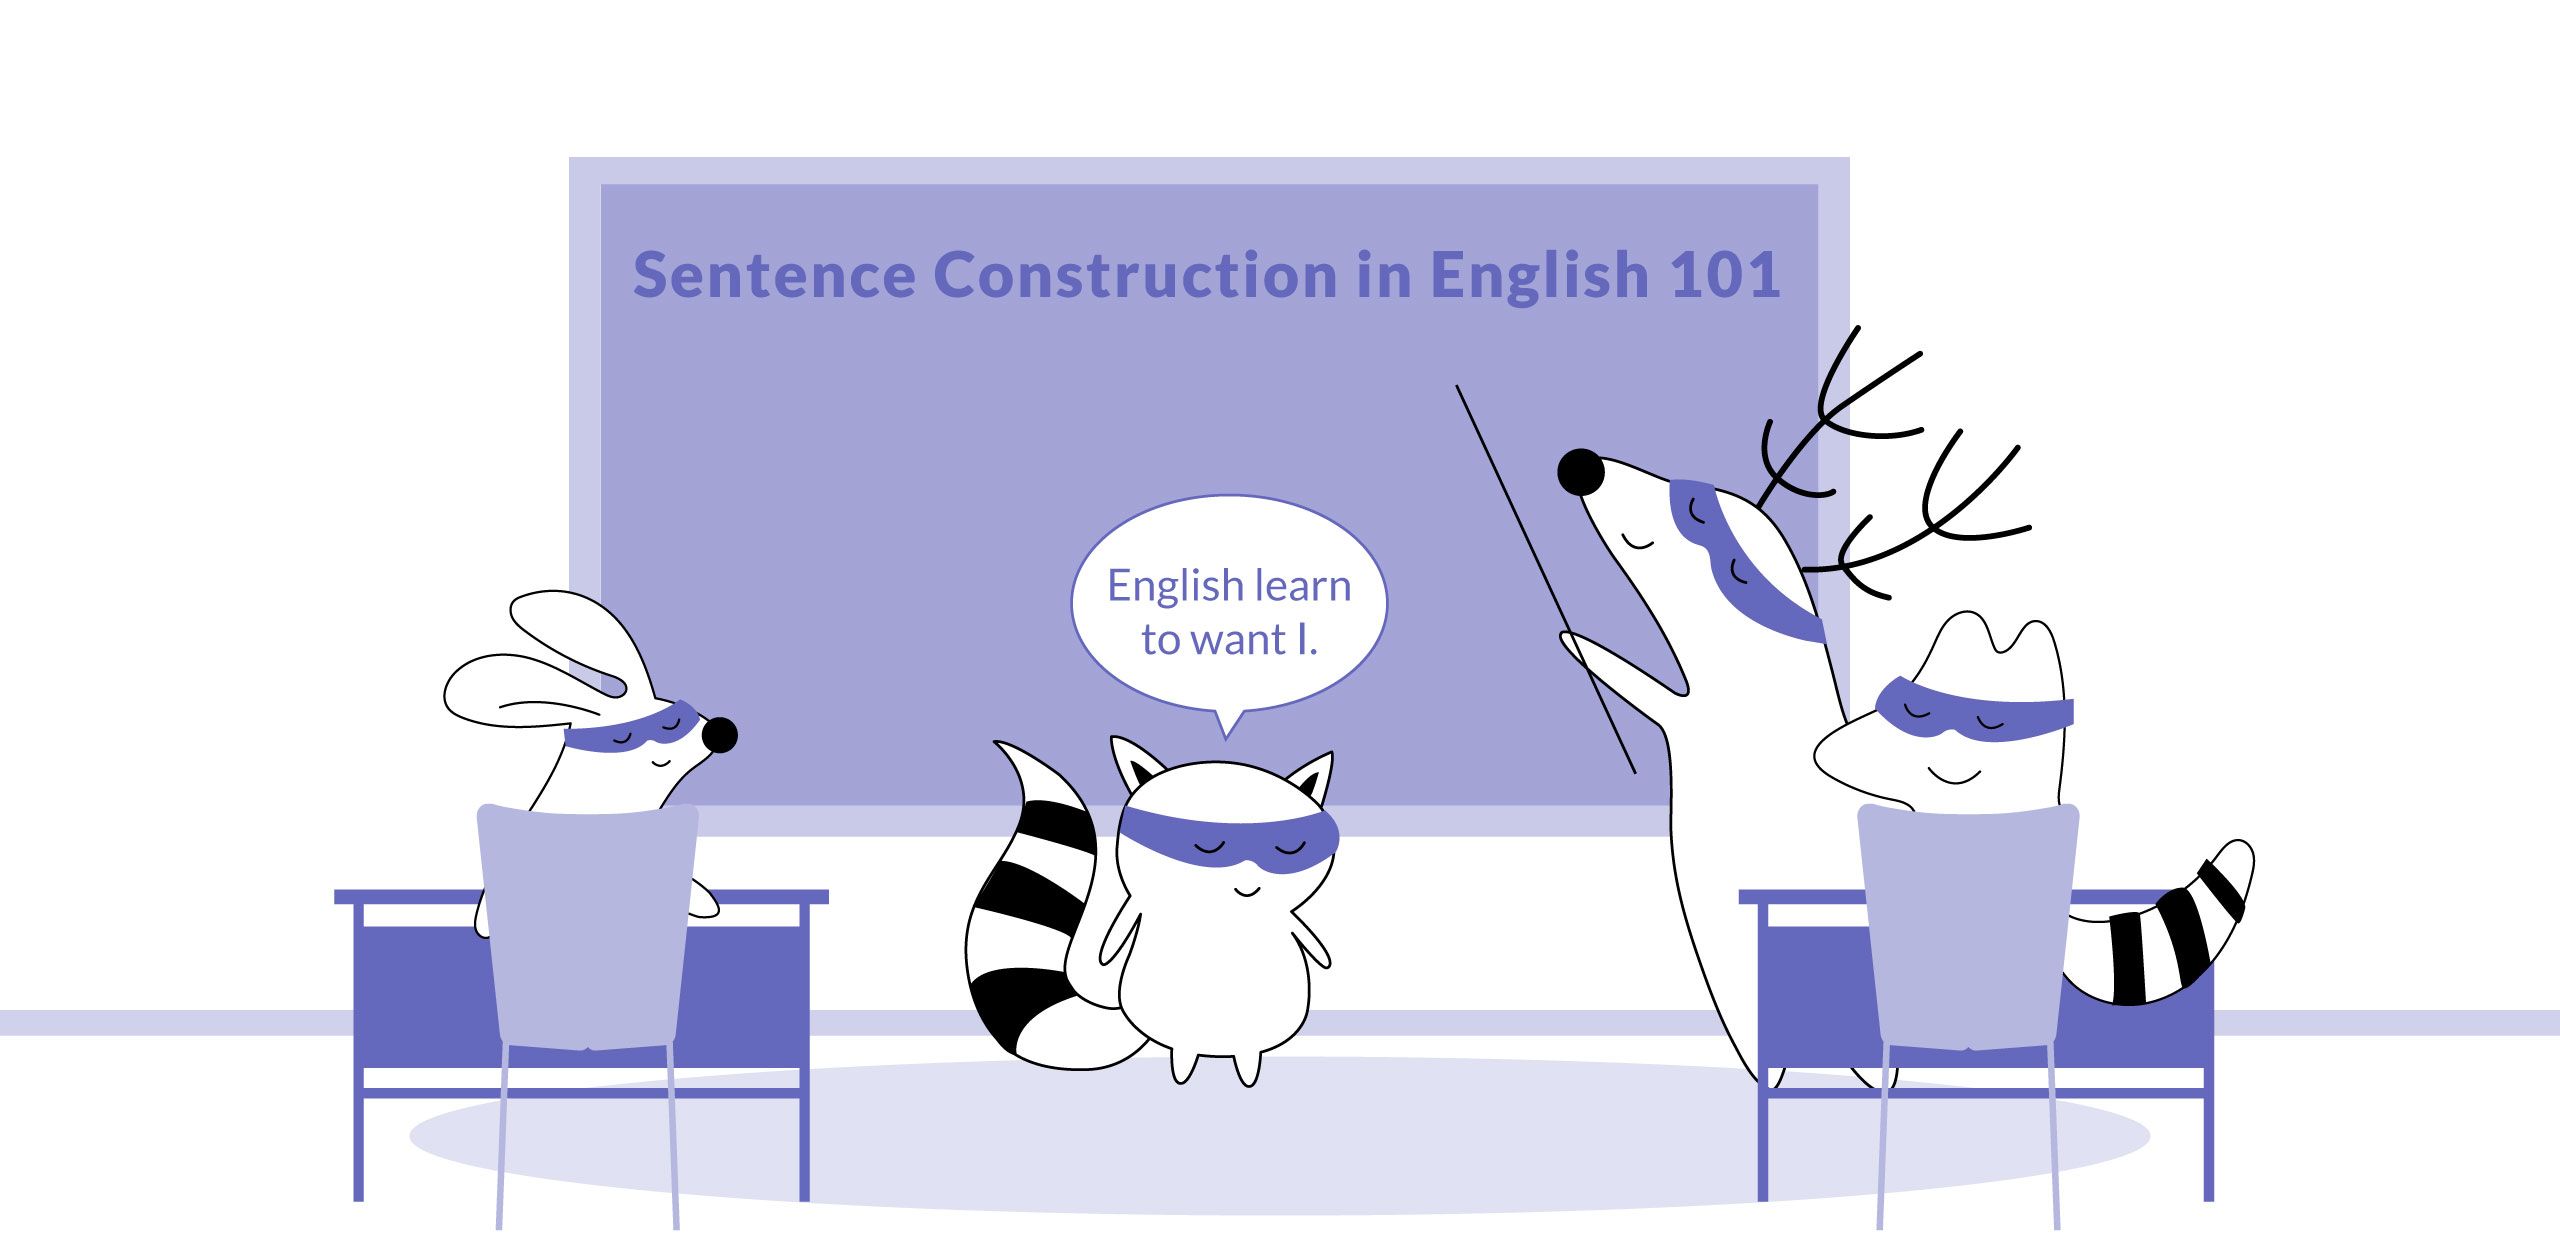 Basic sentence structure in English